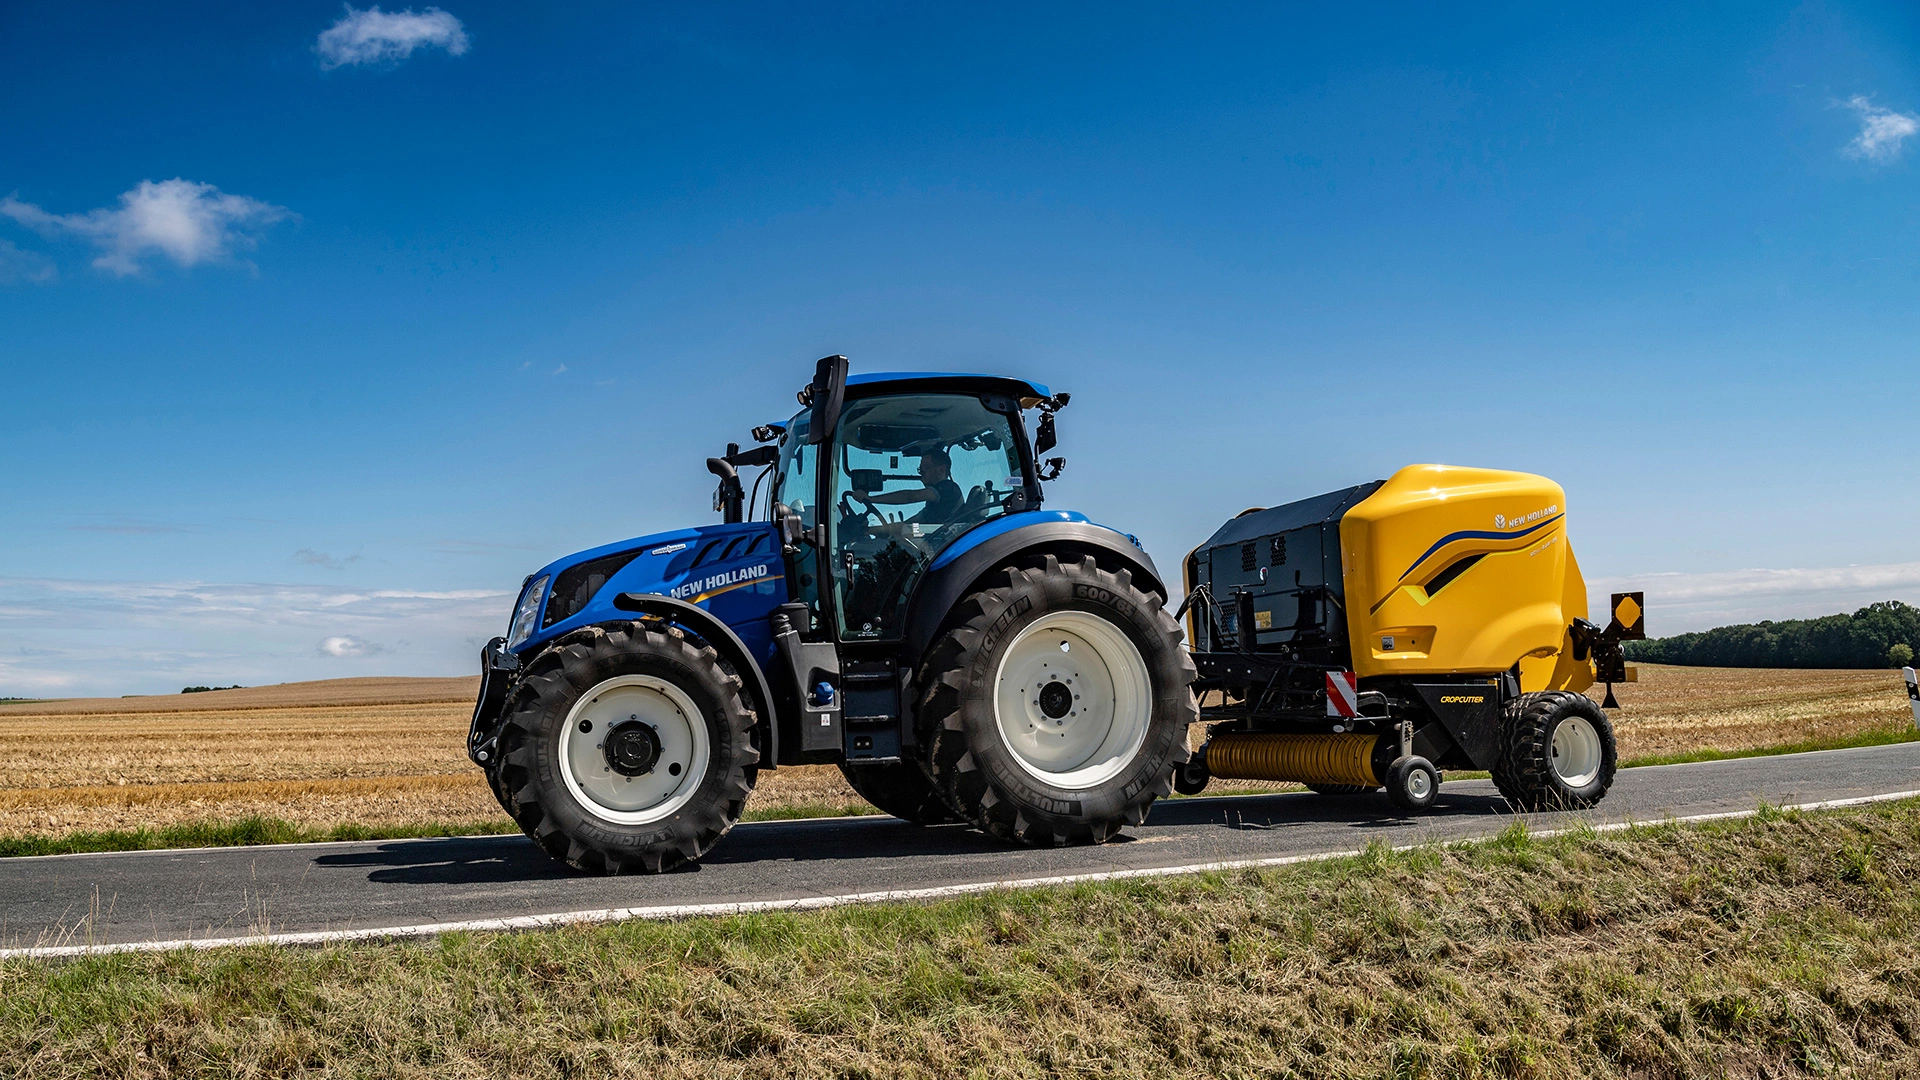 New Holland Tractor with Roll Bar 125 round baler.